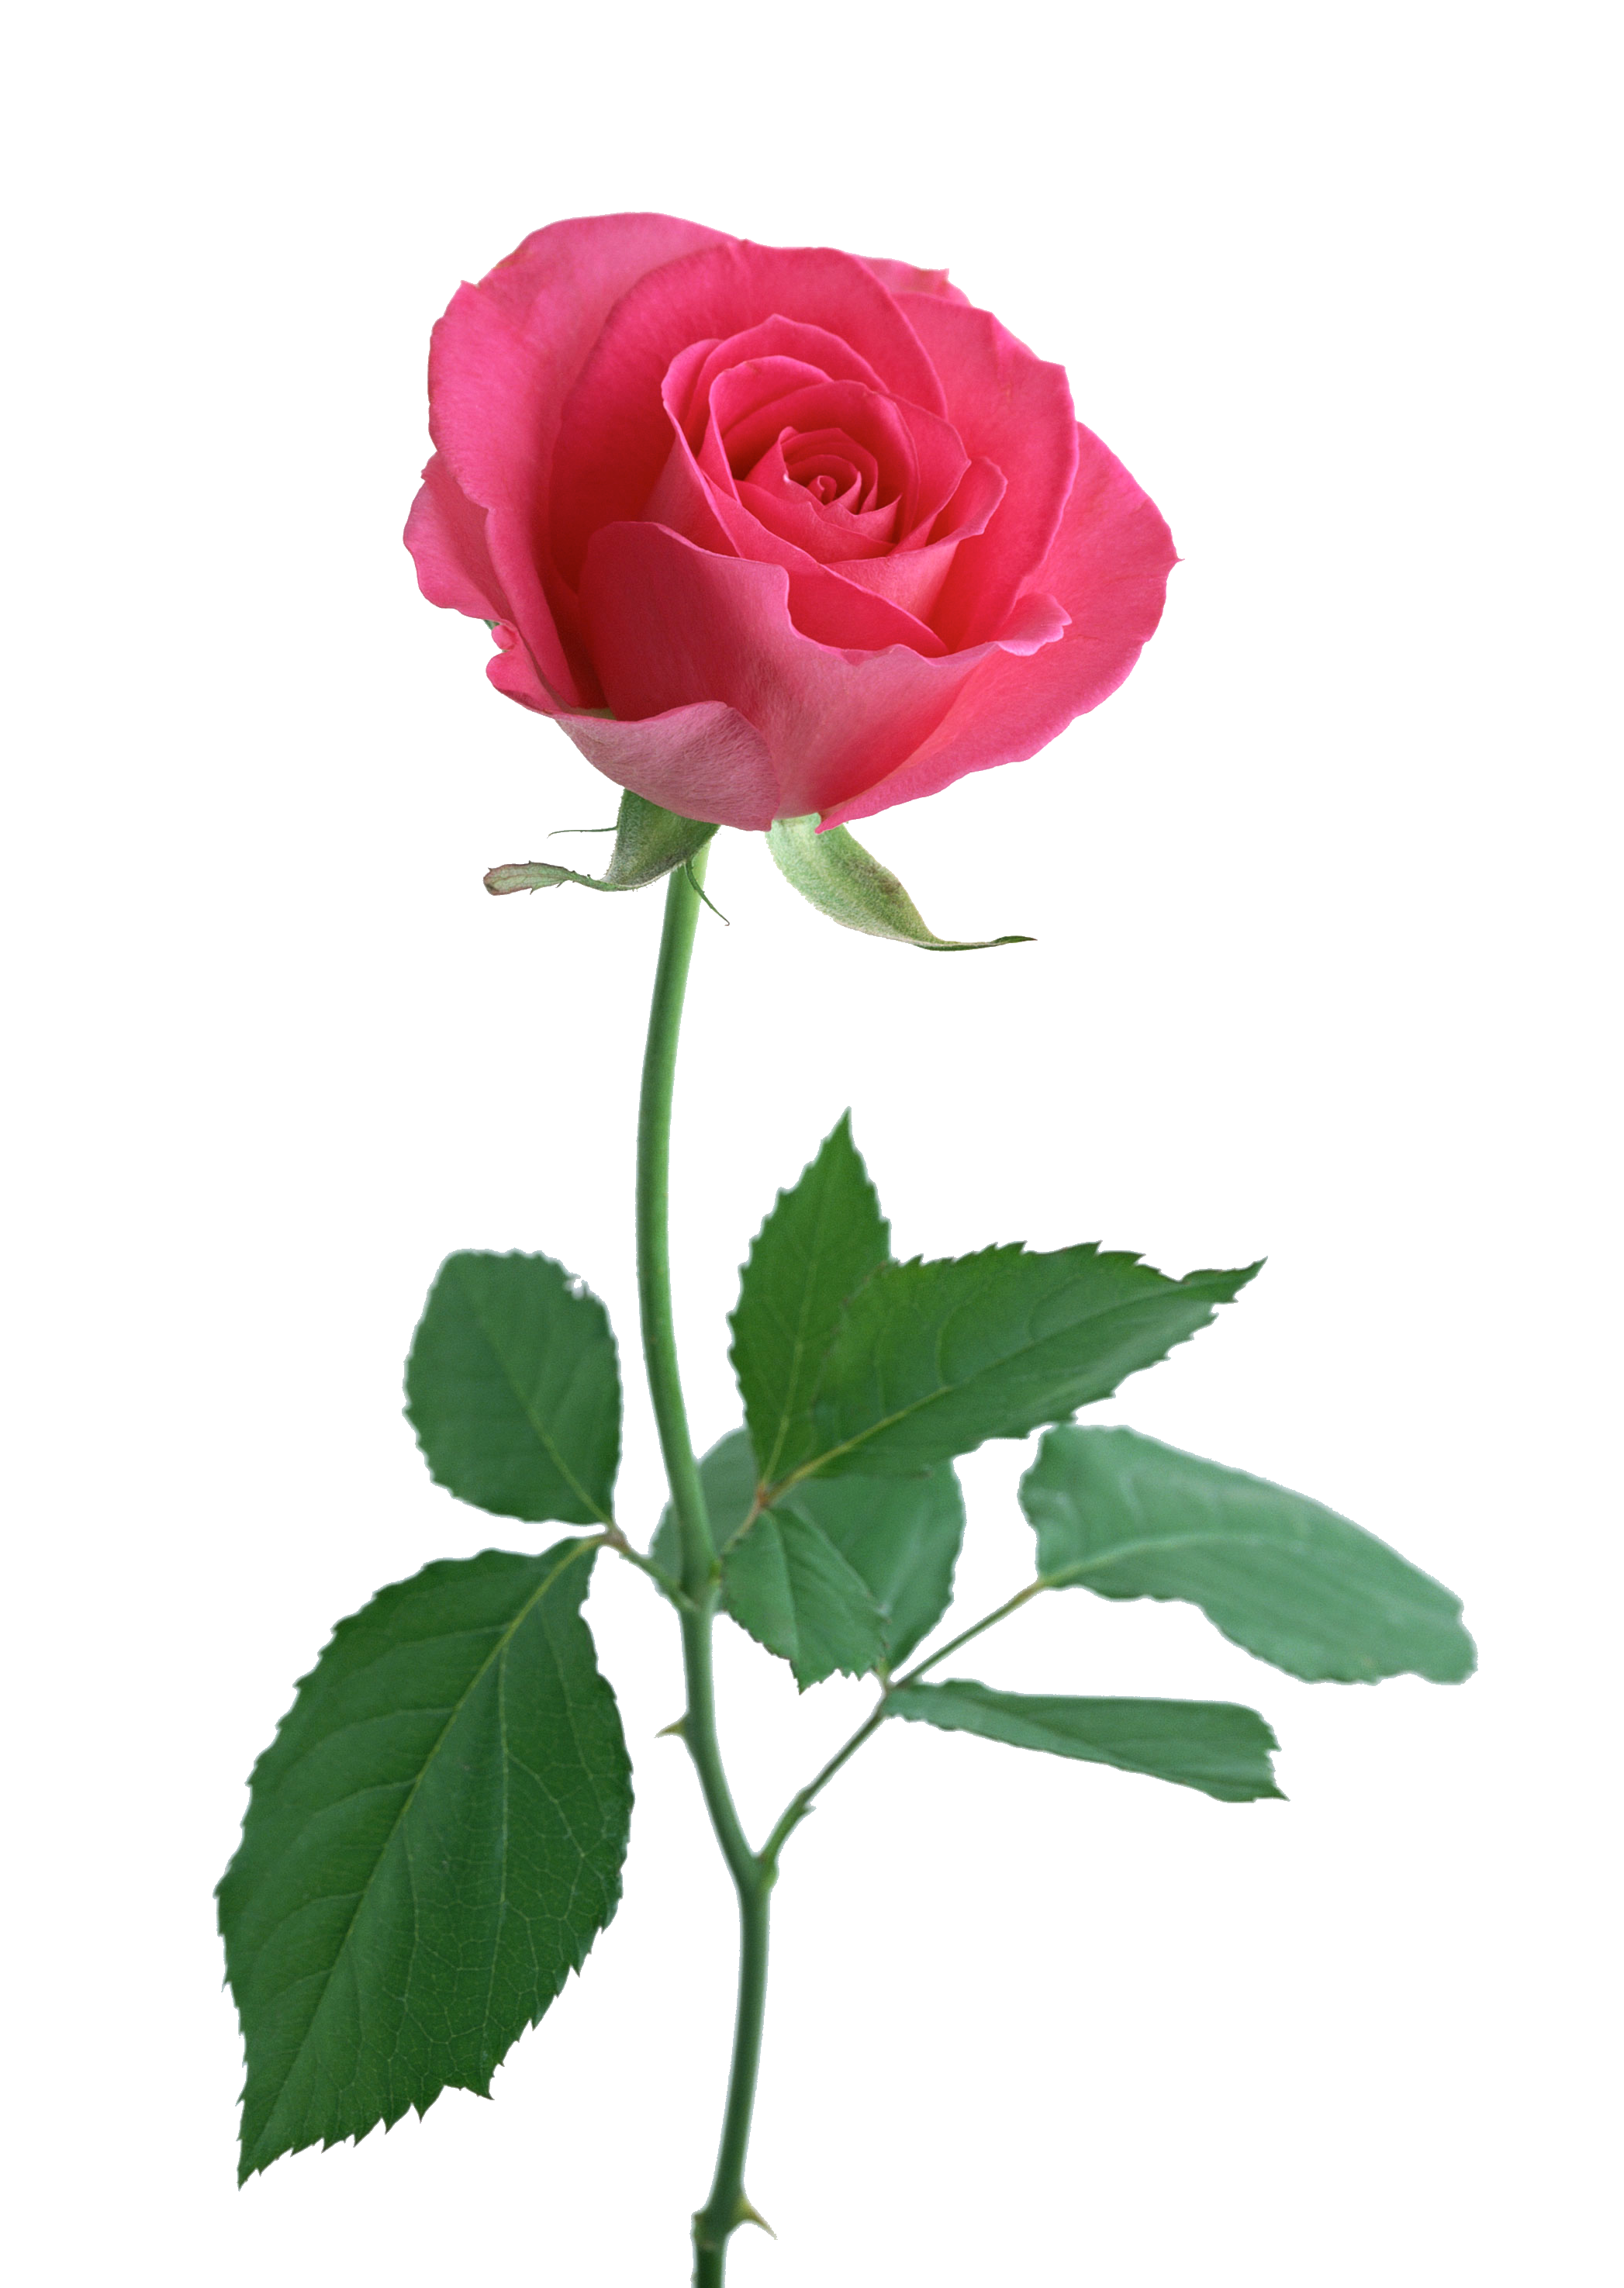 Rose With Stem - ClipArt Best